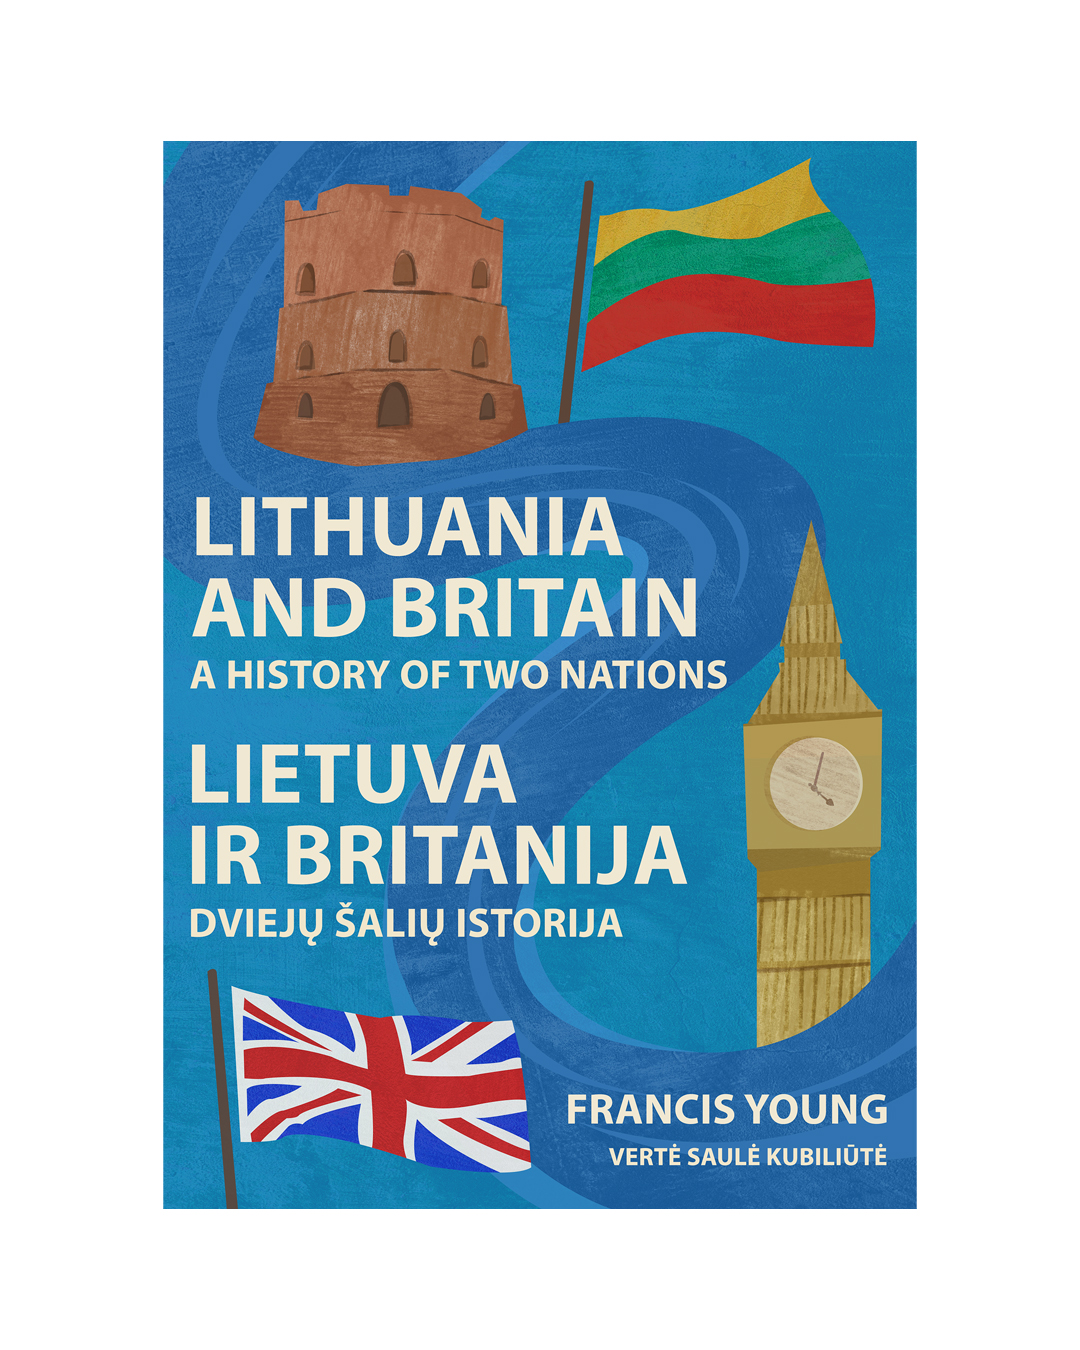 Lithuania and Britain book cover